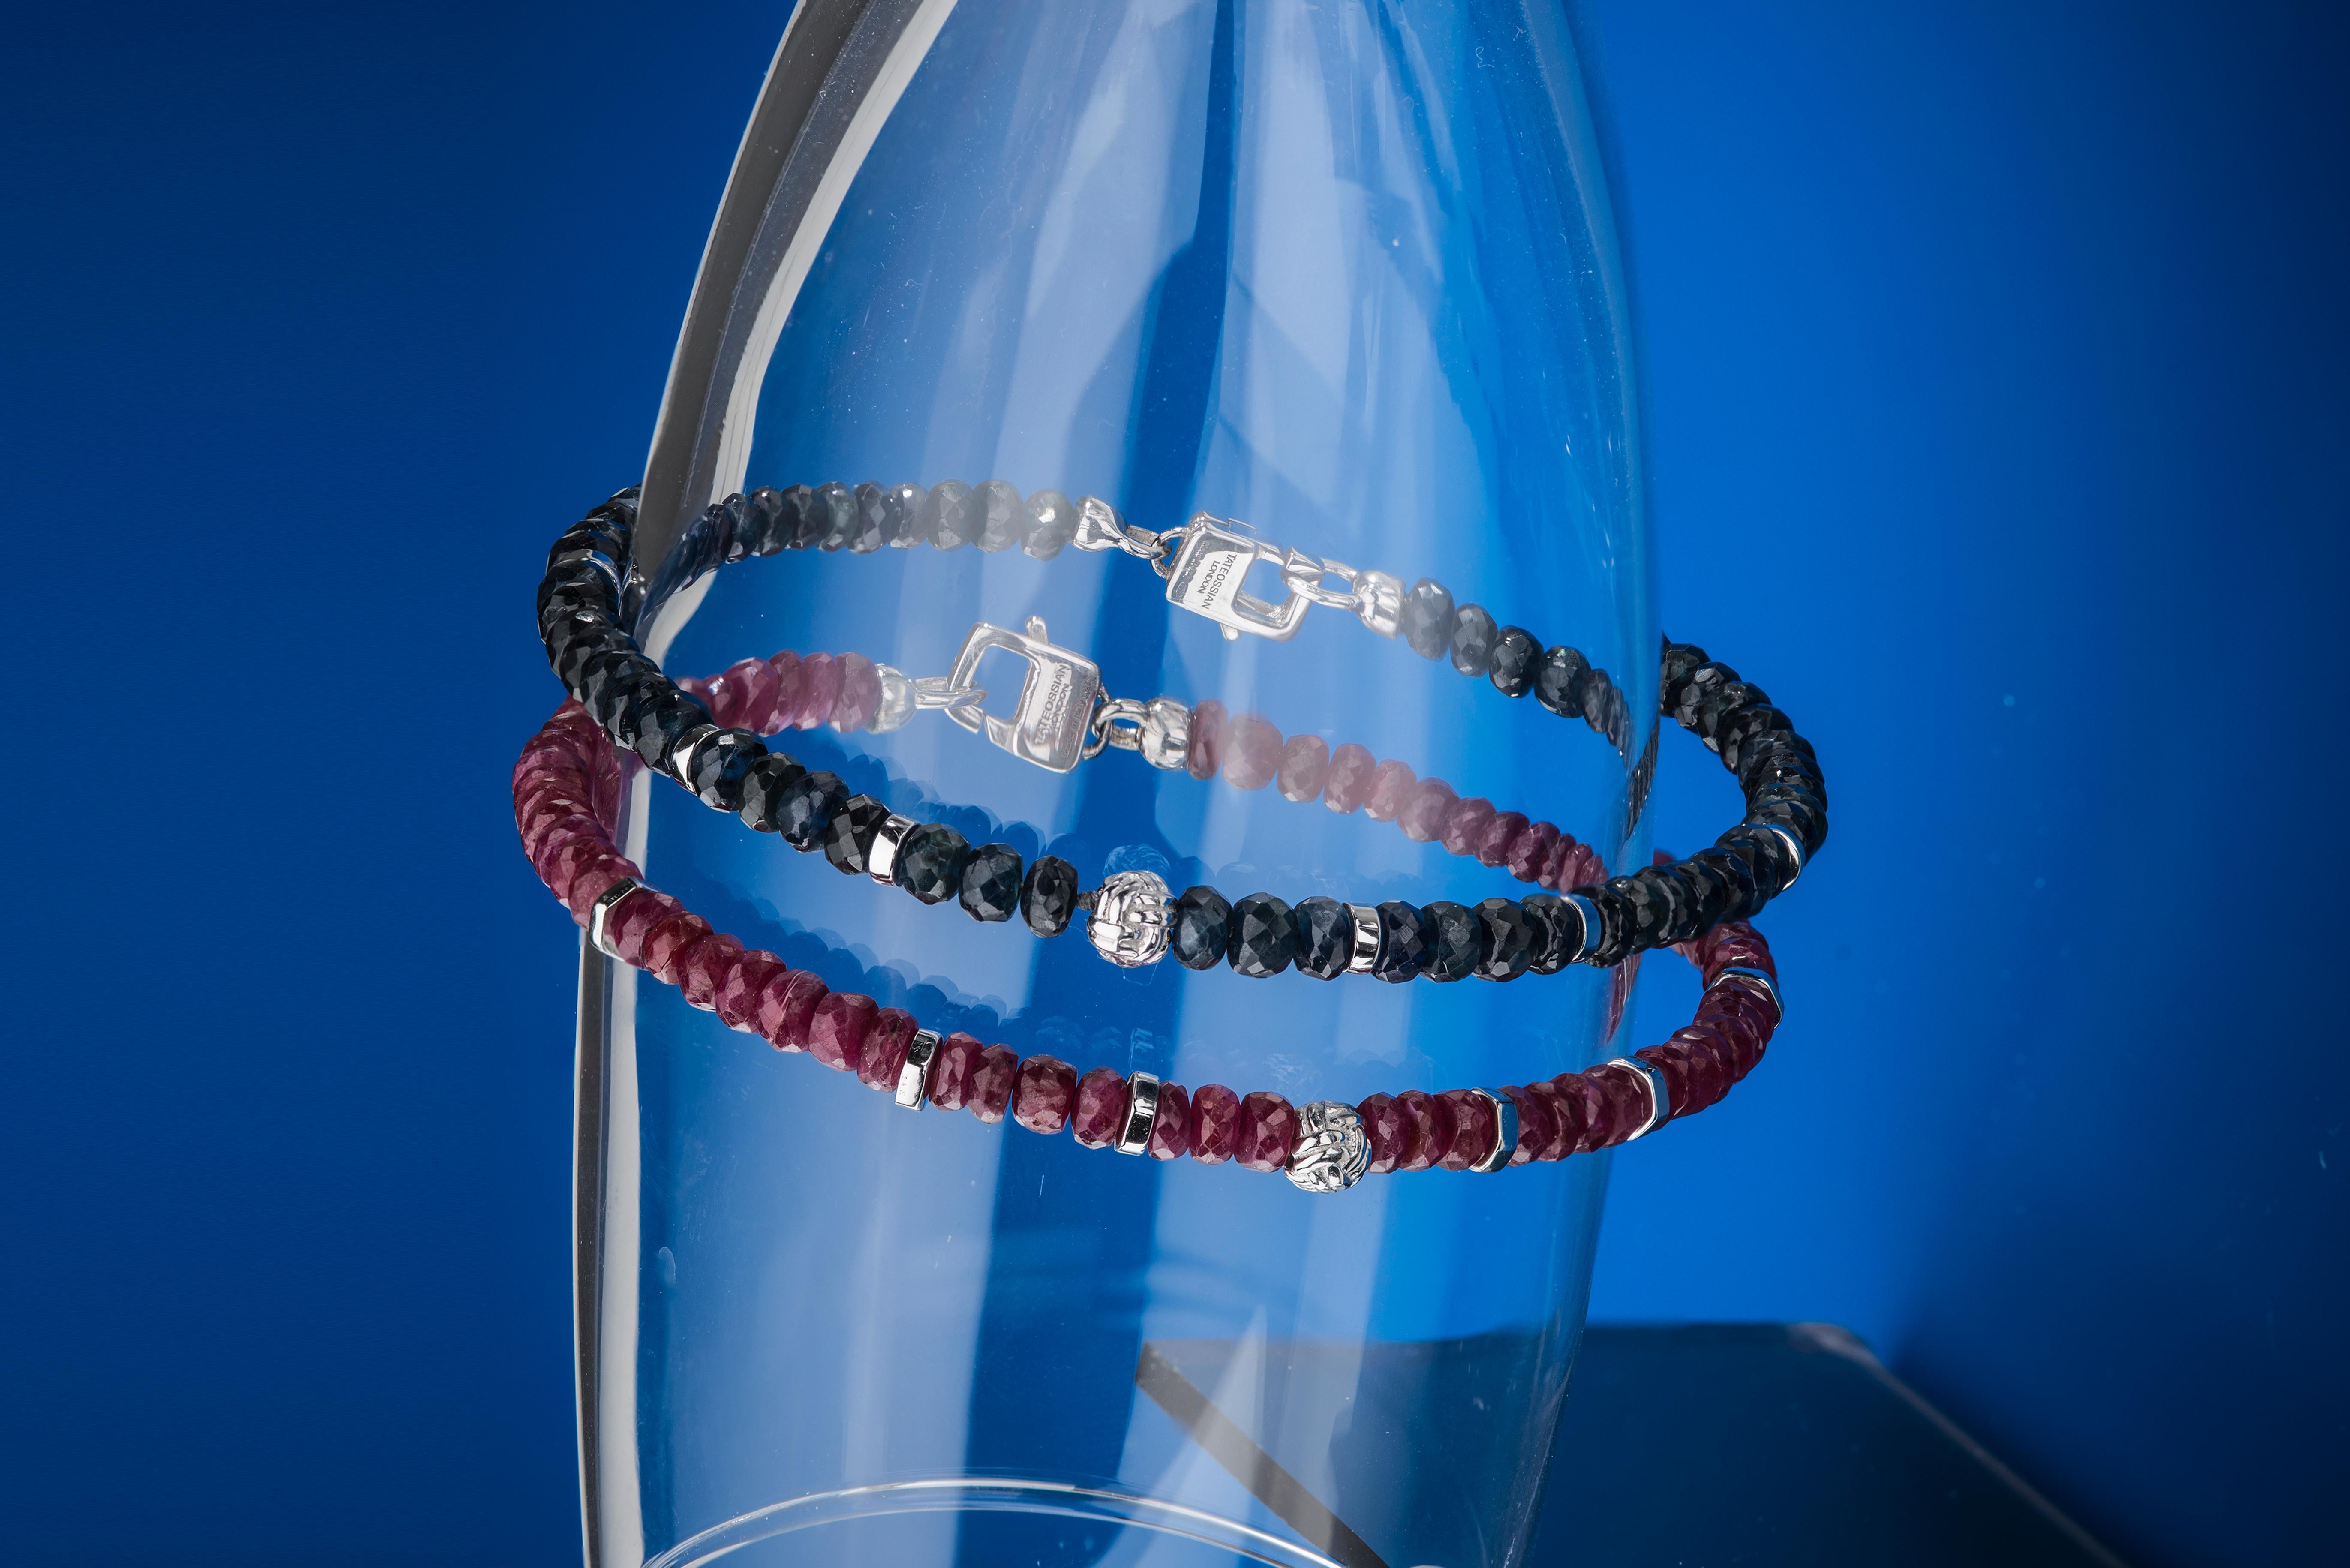 Tateossian continues to explore and find beauty in rare and less traditional precious stones. This hand strung beaded bracelet are made up of  precious Rubies faceted rondels, silver discs, a central silver knot bead and our signature Tateossian